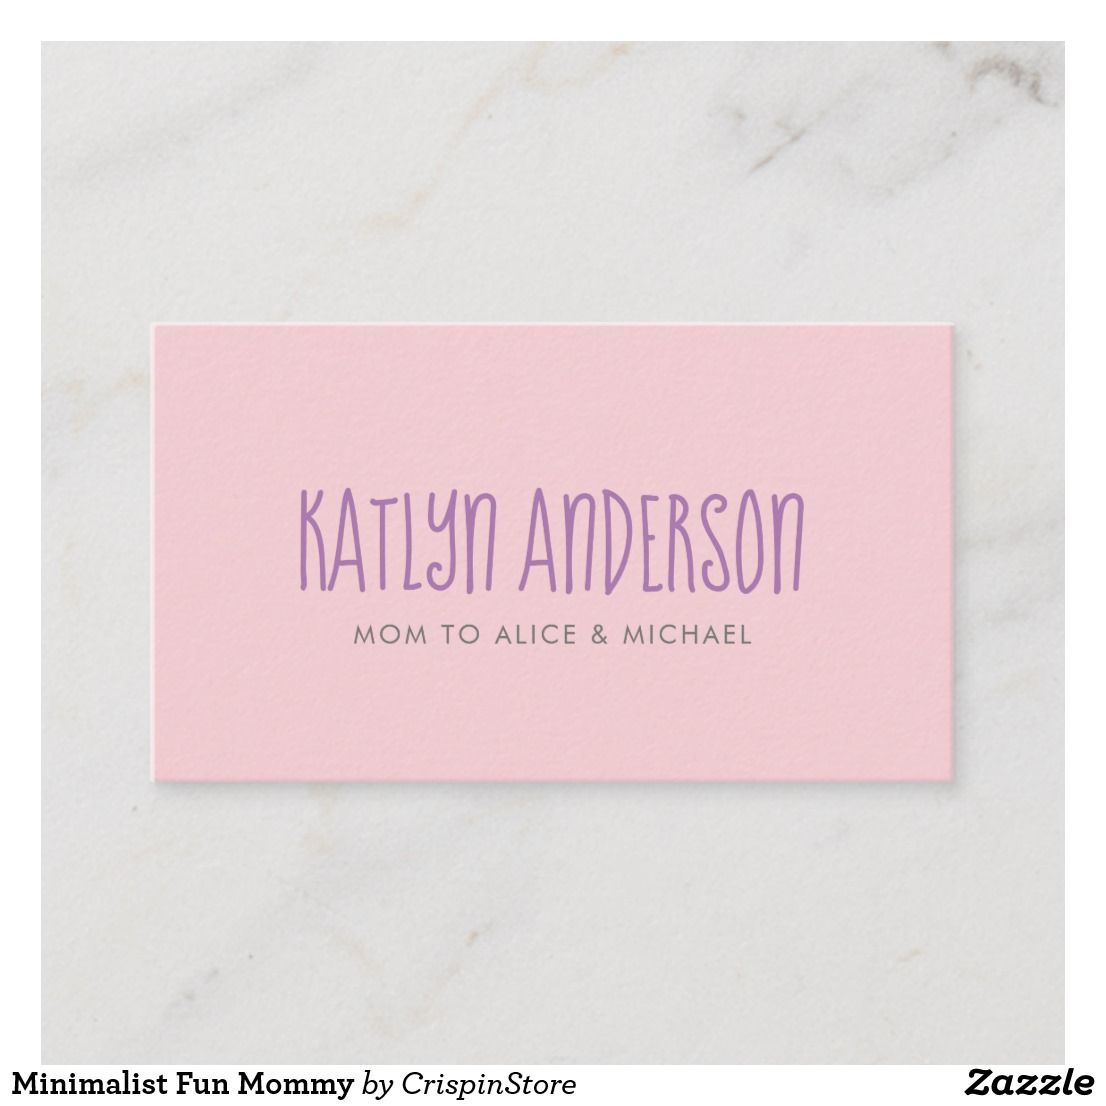 mommy business cards 3